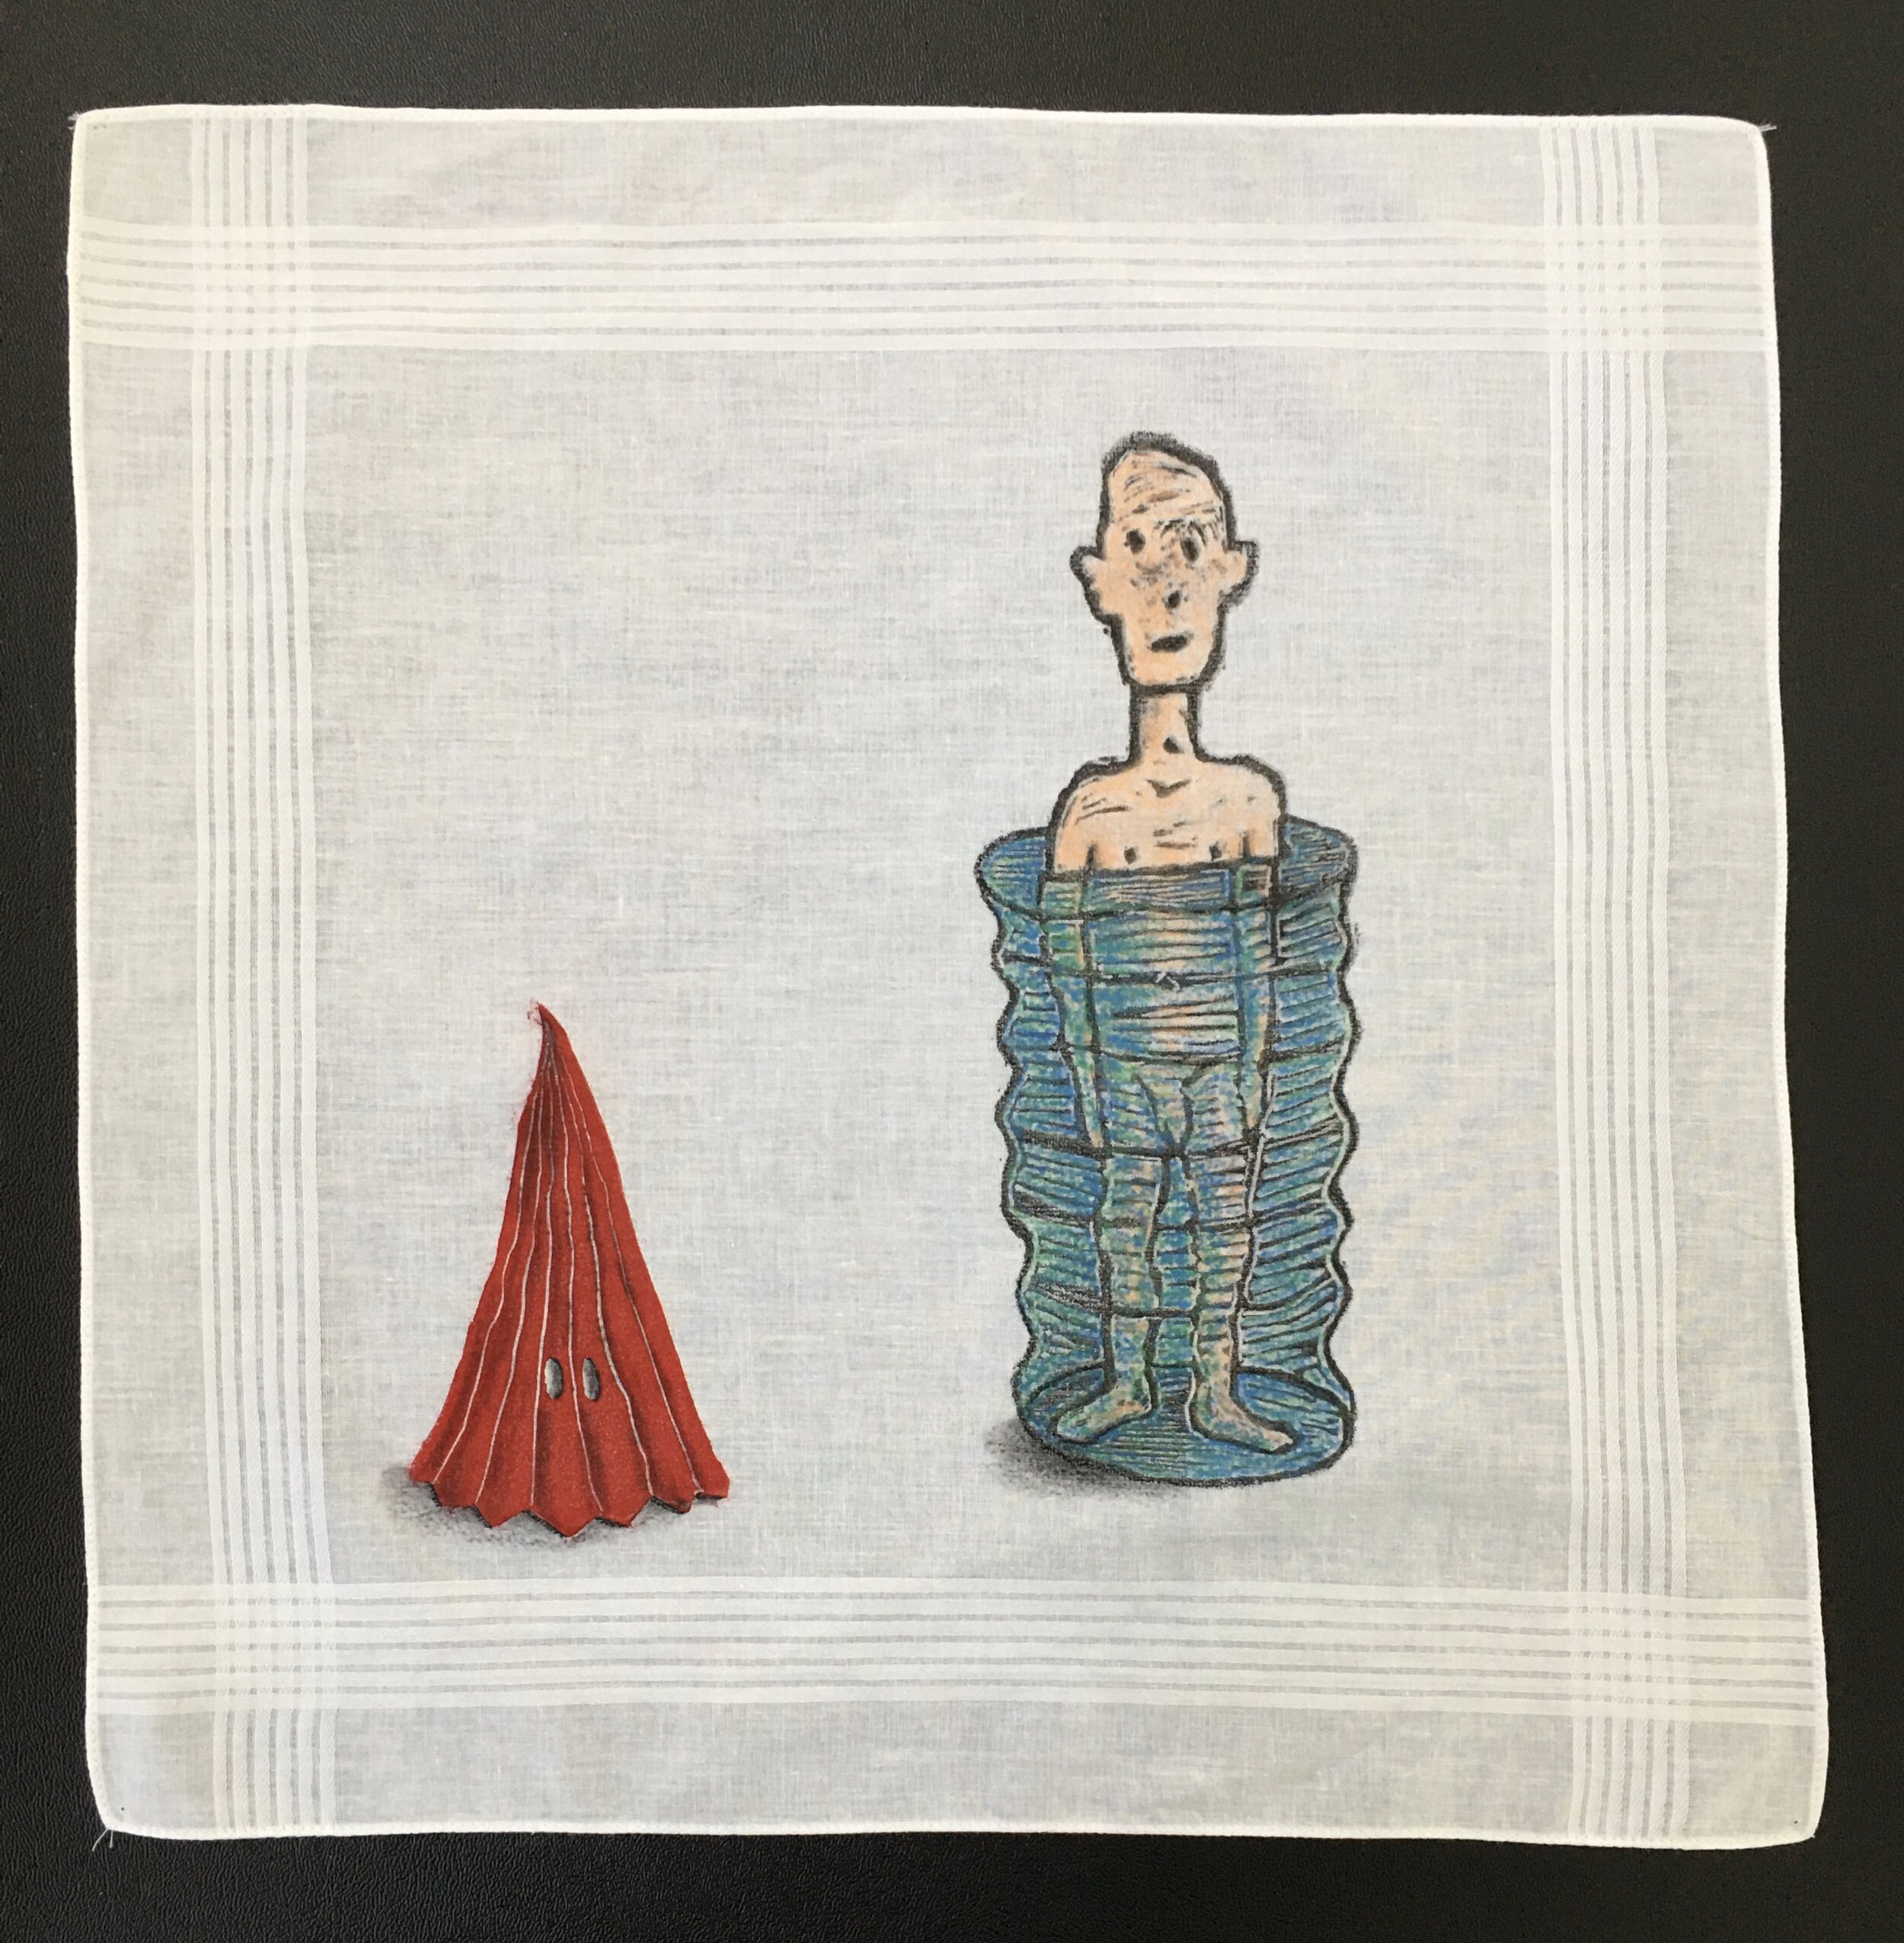  Dane Goodman  waiting out the year,  2020 Hand printed double-block ink print on cotton handkerchief, with hand coloring: crayon and litho crayon 15 x 15 inches 